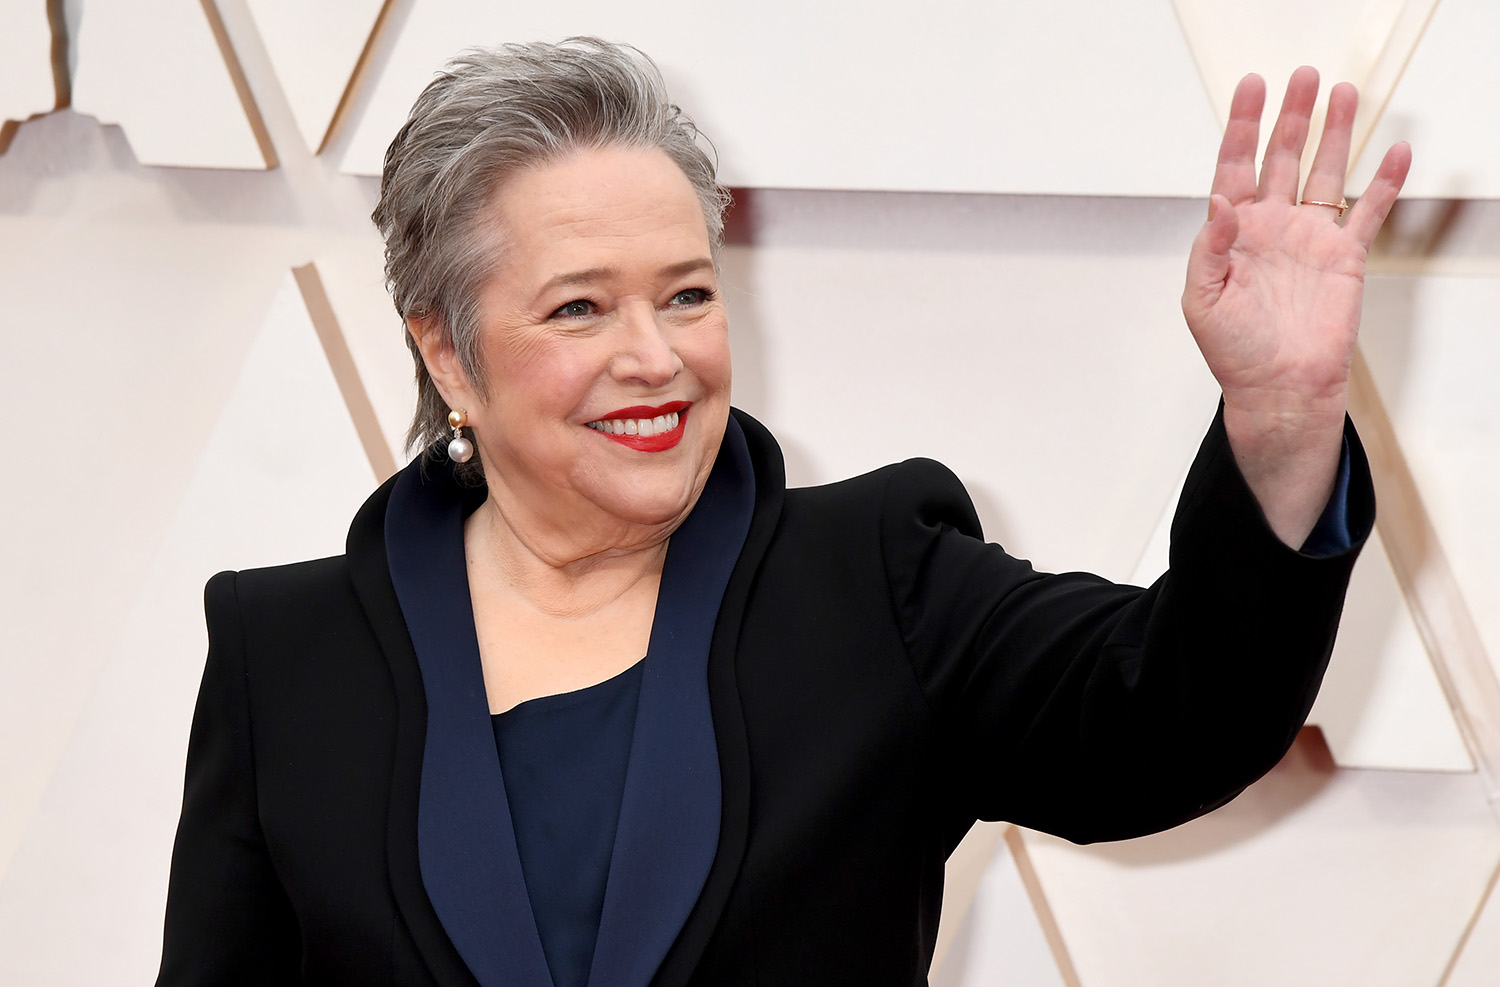 American Horror Story alum Kathy Bates attends the 92nd Annual Academy Awards in 2020